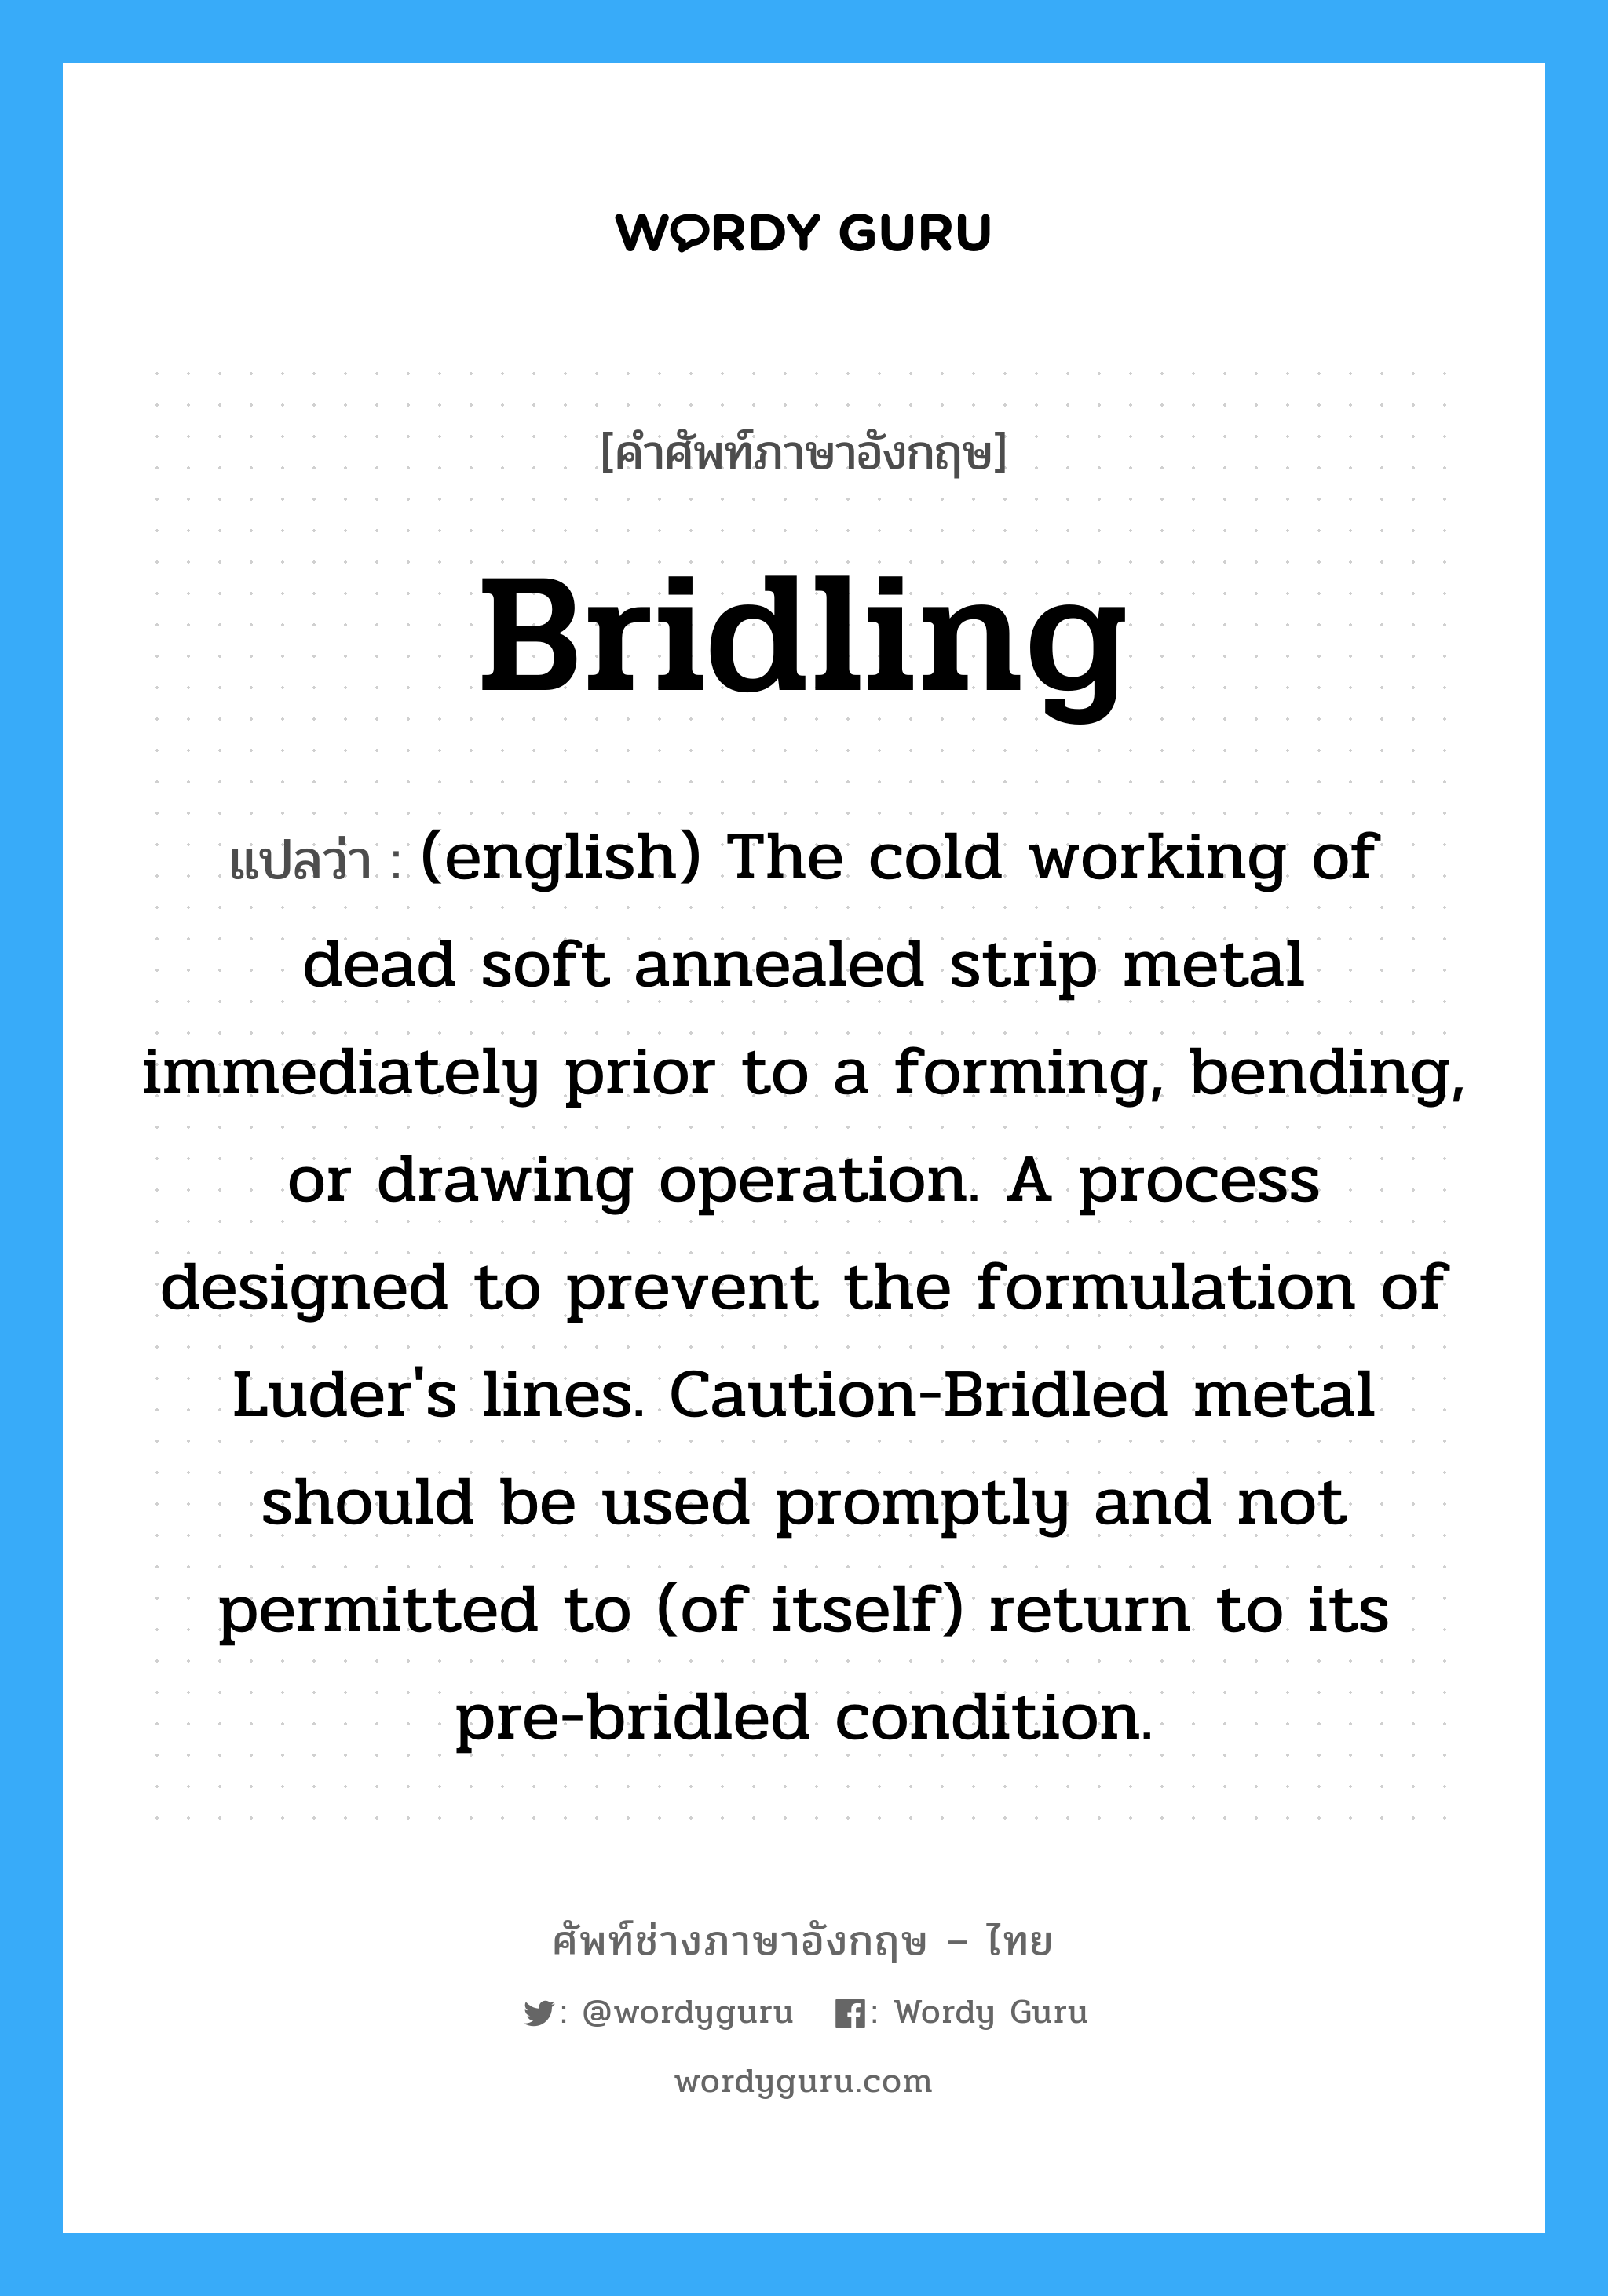 (english) The cold working of dead soft annealed strip metal immediately prior to a forming, bending, or drawing operation. A process designed to prevent the formulation of Luder's lines. Caution-Bridled metal should be used promptly and not permitted to (of itself) return to its pre-bridled condition. ภาษาอังกฤษ?, คำศัพท์ช่างภาษาอังกฤษ - ไทย (english) The cold working of dead soft annealed strip metal immediately prior to a forming, bending, or drawing operation. A process designed to prevent the formulation of Luder's lines. Caution-Bridled metal should be used promptly and not permitted to (of itself) return to its pre-bridled condition. คำศัพท์ภาษาอังกฤษ (english) The cold working of dead soft annealed strip metal immediately prior to a forming, bending, or drawing operation. A process designed to prevent the formulation of Luder's lines. Caution-Bridled metal should be used promptly and not permitted to (of itself) return to its pre-bridled condition. แปลว่า Bridling